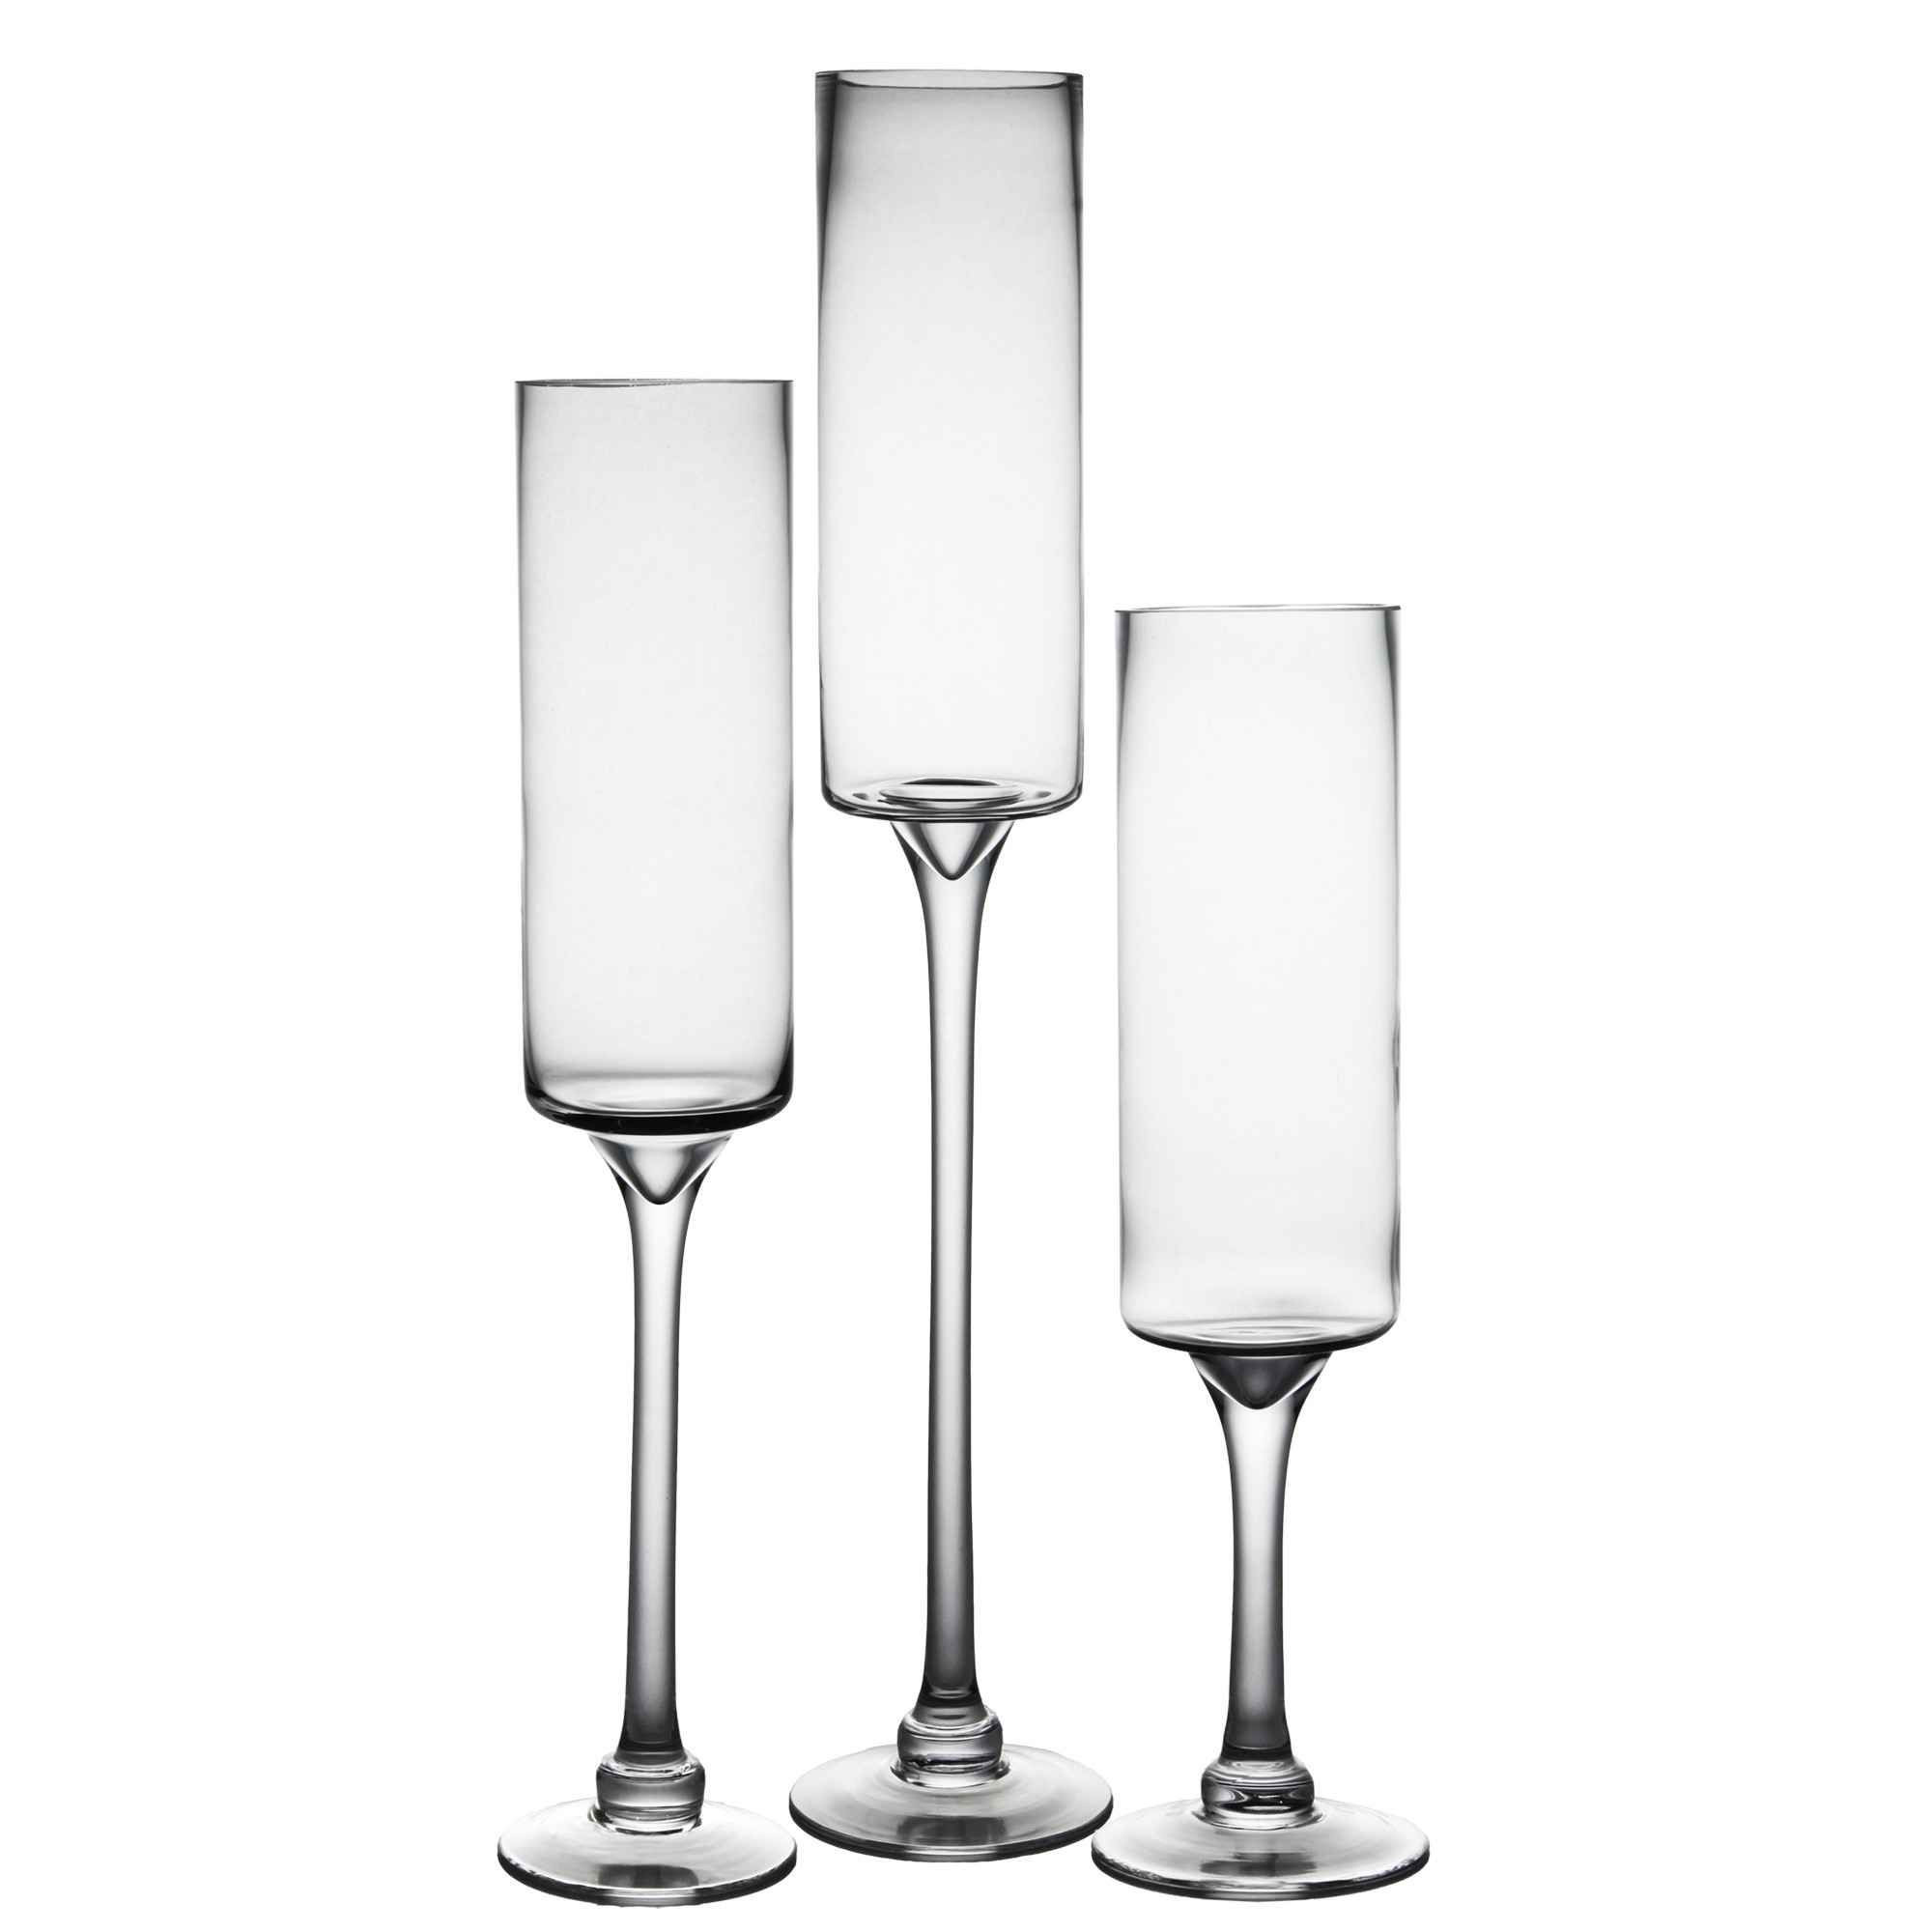 23 Lovely Modern Crystal Vase 2024 free download modern crystal vase of big glass vase beautiful l h vases 12 inch hurricane clear glass in big glass vase beautiful l h vases 12 inch hurricane clear glass vase i 0d cheap in